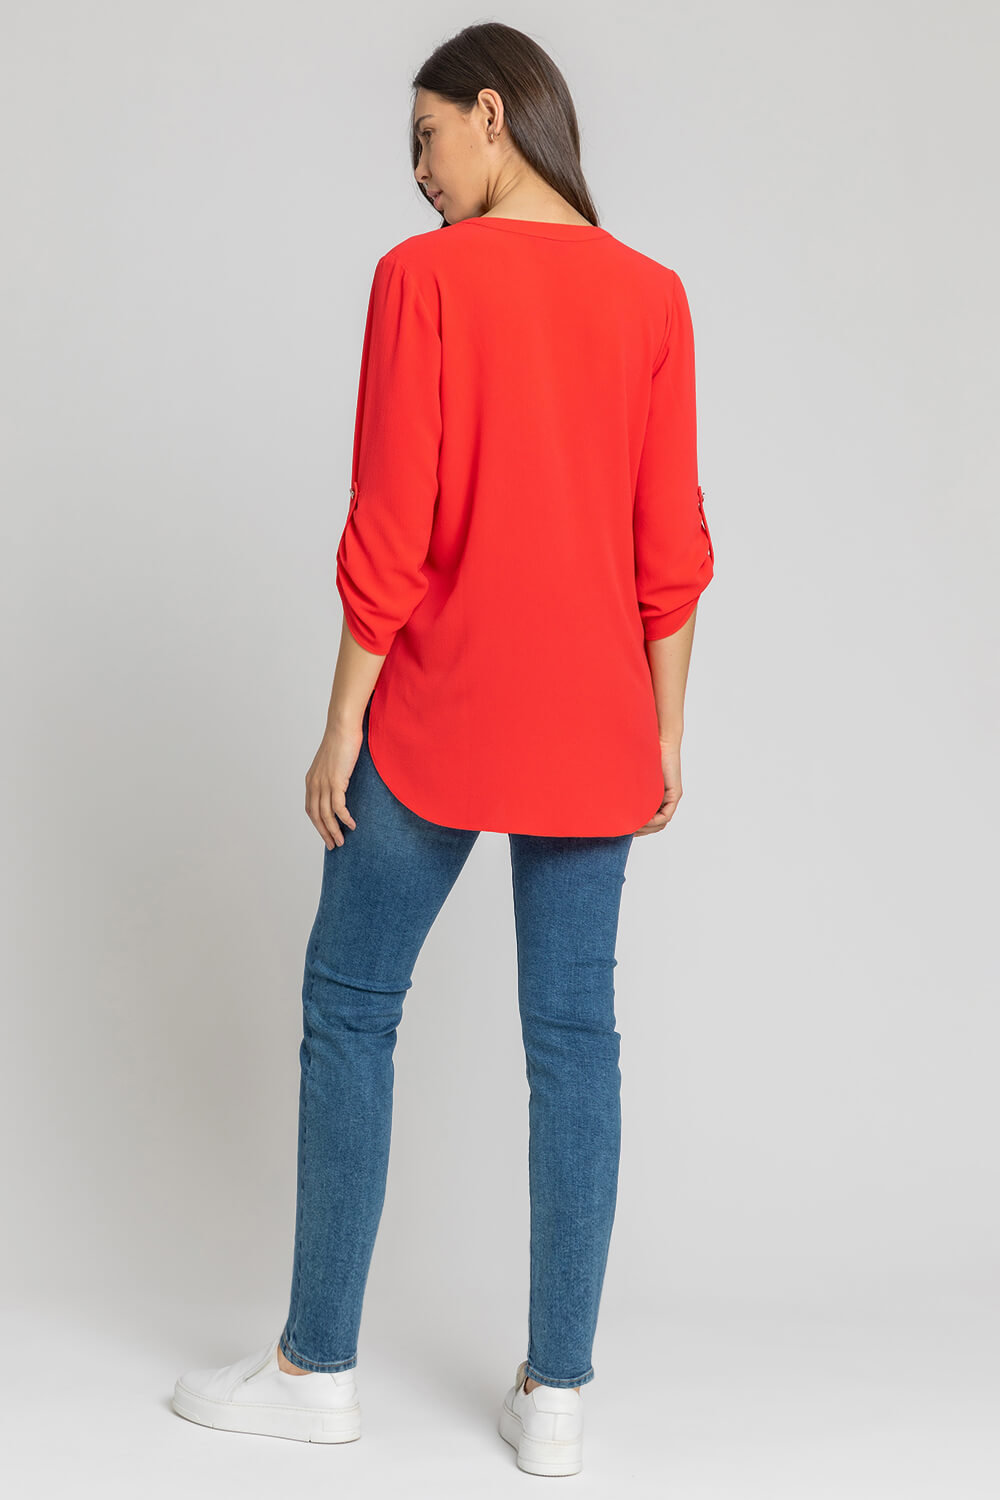 CORAL Longline Heart Button Detail Blouse, Image 2 of 5